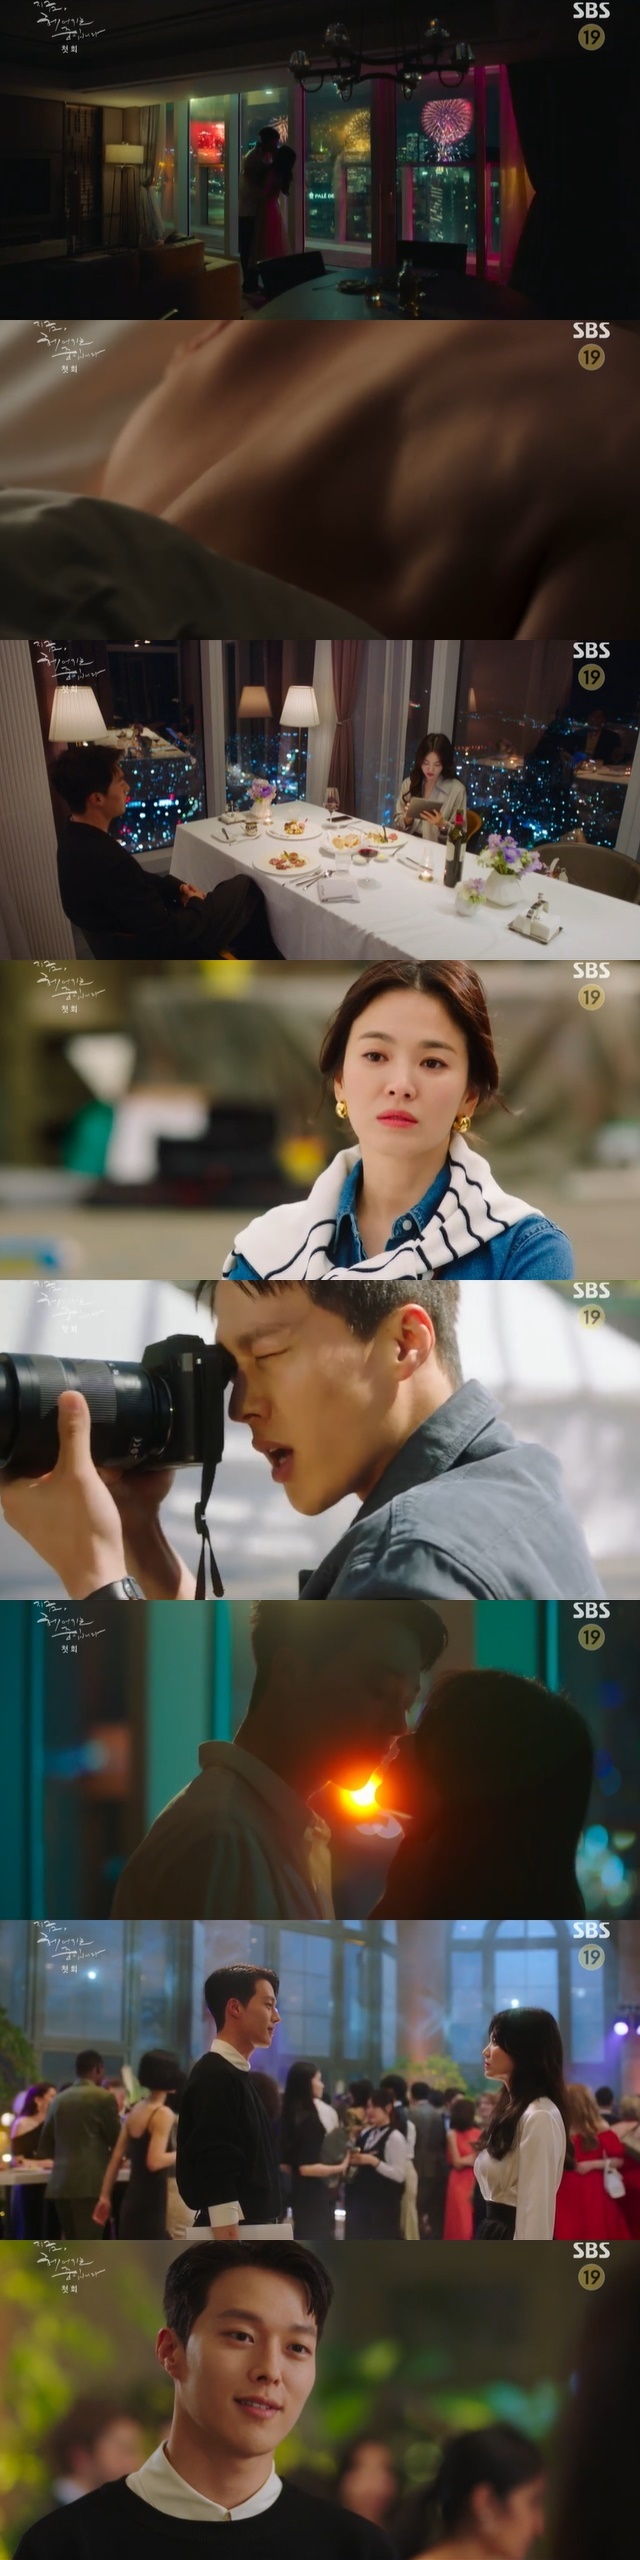 Jang Ki-yong goes straight for Song Hye-kyoIn the first episode of SBSs Golden Earth Drama, Now, Im Breaking Up (playplayplayed by Jane, directed by Lee Gil-bok), which was first broadcast on November 12, the first meeting of Hae Young (Song Hye-kyo) and Yoon Jae-guk (Jang Ki-yong) was drawn.On the day, Ha Young-eun spent a night in a drunken manner with a stranger he met at the opening party of the first K Fashion Week in Busan. After One Night, Ha Young-eun prepared to leave the hotel room first.The man who caught Ha Young asked in French, What is your name? What should I call it when I meet again?It was an indirect delivery of the desire to meet again, but Ha Young said, It will not happen.We will not be here when fashion week is over, he said, Goodbye to Paris and left the hotel room.Since then, Ha Young-eun has been busy with his work, and he has also been urged to prevent accidents caused by his high school alumni and boss Hwang Chi-sook (Choi Hee-seo).Hwang Chi-sook mediated the scene of arresting the wind of Boy friend and Derwon brand model Jimi Hendrix.When Ha Young left the hotel room after finishing the scene, Jimi Hendrix followed the elevator and grabbed Ha Young and said, My sister, we did not have anything.I ran into him at the club yesterday, and hes not going to sleep. We just slept with the blanket. Just trust me once. At the end of the day, Yoon Jae-guk, who was in the elevator together, looked at the two people with strange eyes.Yoon continued to be conscious of Ha Young-eun. Ha Young-eun finally said, It was a simple one night.I do not need to chew it out. This was about Hwang Chi-suks lover Jimi Hendrix and his One Night opponent, but Yoon Jae-guk did not hear it until the end.Yoon just looked at Ha Yeong-eun the whole time.Ha Young-eun went back to Hwang Chi-sook when Hwang Chi-sook failed to wake up due to his work with Jimi Hendrix, and Ha Young-eun had an obligation to send Hwang Chi-sook to the evening sun.However, Hwang Chi-sook is completely drunk and insists, I can not go to this place. You go and do it.(My father) would say its your responsibility that I didnt manage properly, but would you be okay? Lets just go quietly and know the two of us.Yoon Jae-guk was the one who faced Ha Young-euns proxy. Yoon Jae-guk was deceived by his acquaintance, Seok Do-hoon (Kim Joo-heon), who kissed his mother, Min-sa (Cha Hwa-yeon).Yoon Jae-guk sat down with Ha Young-eun and looked at her working at the sunrise and thought, In the morning, I dragged a man out of the hotel room and work in the evening?Yoon asked, Are you a Desiigner? And introduced it as I am a freelance photographer. Then Yoon said, I may have already met.Ha Young-eun defeated all of Yoon Jae-kooks words and said, I did not come out because I wanted to be here. I do not think I will see Yoon Jae-kook again.Ha Yeong-eun got up as soon as he finished his meal.However, Ha Young-eun soon needed Yoon Jae-guk. All the pictures he had taken were gone.Ha Young-eun, who had to take a picture of Baro the next day, recalled that Yoon Jae-guk introduced himself as a photographer.Ha Young-eun hastily followed Yoon Jae-kook and said, You have time tomorrow. Youll get me on-site. Im preparing for Olivier and Cullaber next season.Yoon Jae-guk laughed as if he were ridiculous. On the night, Yoon Jae-guk checked the actual SNS photos of Ha Jae-sook and said, Its funny?I laughed again.Yoon Jae-kook, who eventually worked with Ha Young-eun the next day, showed unusual skills in the field, and Ha Young-eun watched Yoon Jae-kooks professional appearance and recalled the previous One Night.Ha Yeong-euns One Night opponent was Baro Yoon Jae-gook.The photo was excellent. Ha Young-eun praised the photo, saying, You take a little more than you think. I really like the picture of Yoon Jae-kook.Yoon Jae-kook has not been able to take another look at Ha Young-euns back view, which has been busy since then.At 5 p.m., at the Olivier Bayer Show, there will also be Yoon Jae-guk, who will follow Seok Do-hoon, and Yoon Jae-guk witnessed an employee who secretly filmed clothes.Behind it was Nam Na-ri (Kim Bo-jung), a subordinate of Ha Young-eun, who planned for revenge that he had already painted with other companies.But Ha Young-eun, who noticed this fact, criticized the South Korean, and Ha Young-eun left the place, saying, I will let you know what Olivier missed.This was all heard from behind by Ha Jae-guk.On the other hand, Hwang Chi-sook attended the After Party and encountered Yoon Jae-guk by chance.Hwang Chi-sook quickly caught the name Seok Do-hoon written on the party invitation and misunderstood Yoon Jae-kooks name as Seok Do-hoon.Ha Young went to see Olivier as he had announced at the After Party, and showed Olivier the photo he took.Ha Yeong-eun tried to convince Olivier with enthusiasm, but Olivier nailed Fashion is money.At this time, Yoon Jae-guk opened the door and revealed to Olivier, who wanted to collaborate with him, that the picture of Ha Young-eun was his work, and gave Ha Young-euns revenge.